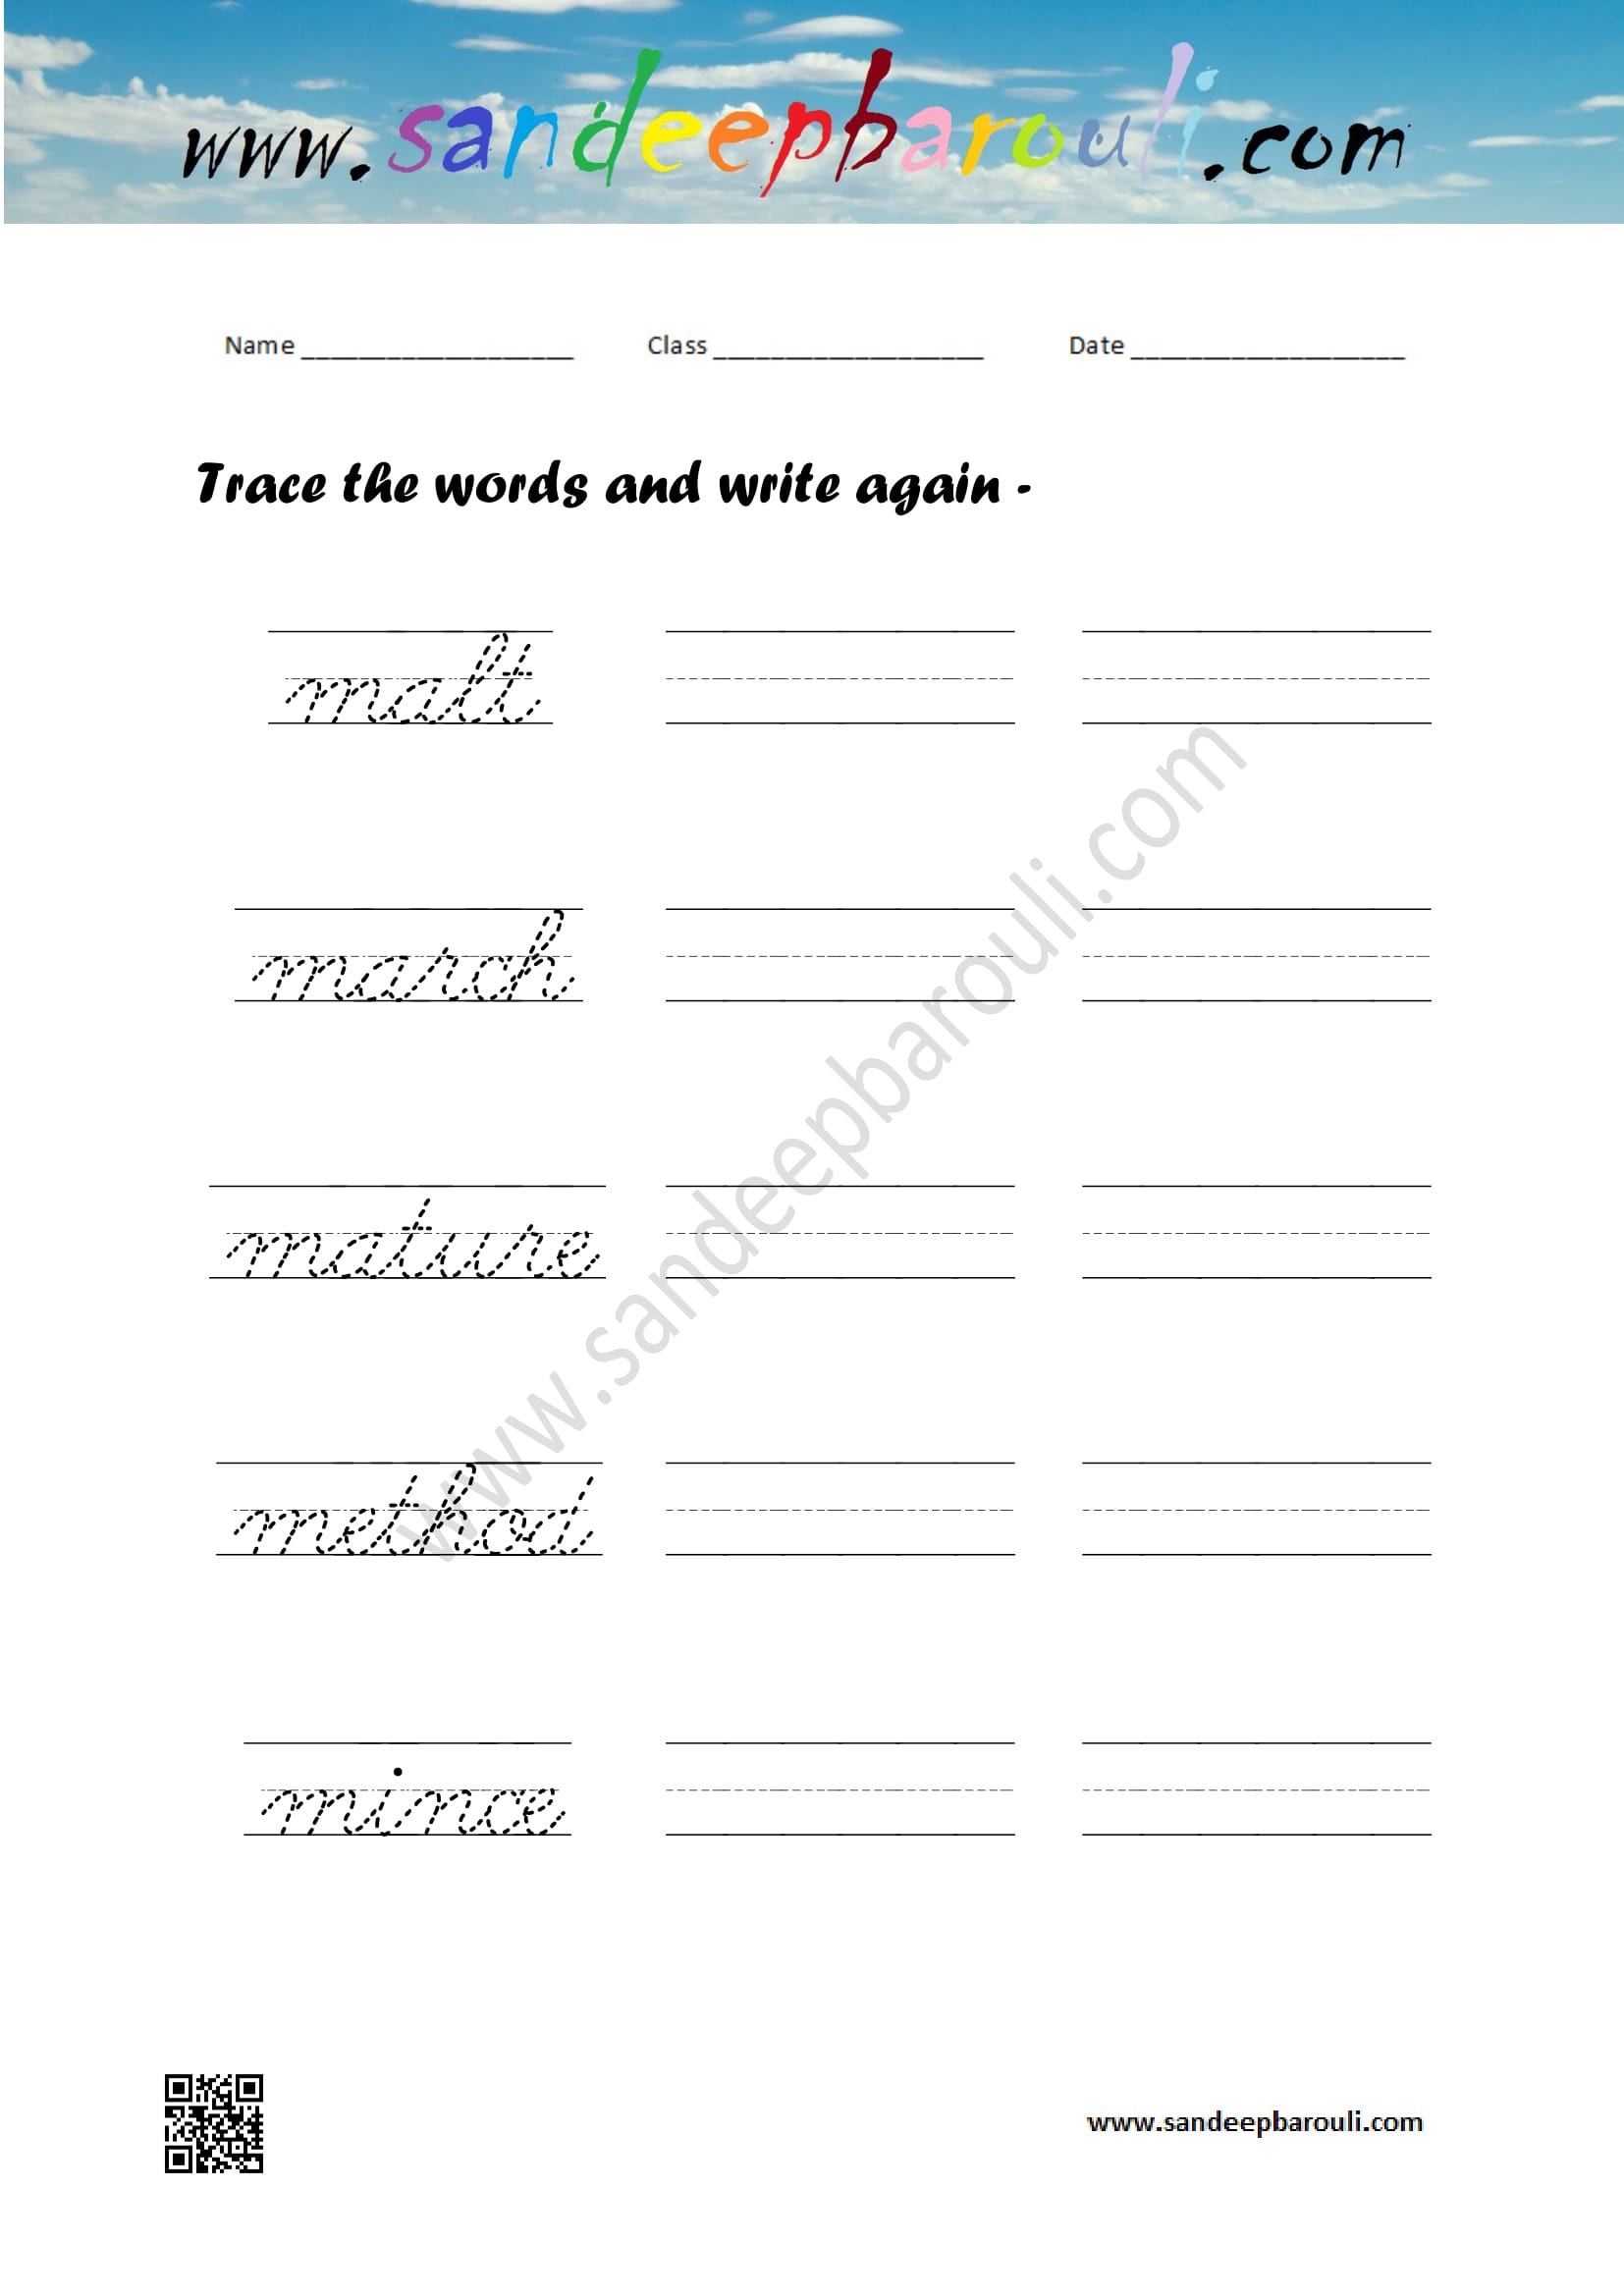 Cursive writing worksheet – trace the words and write again (100)